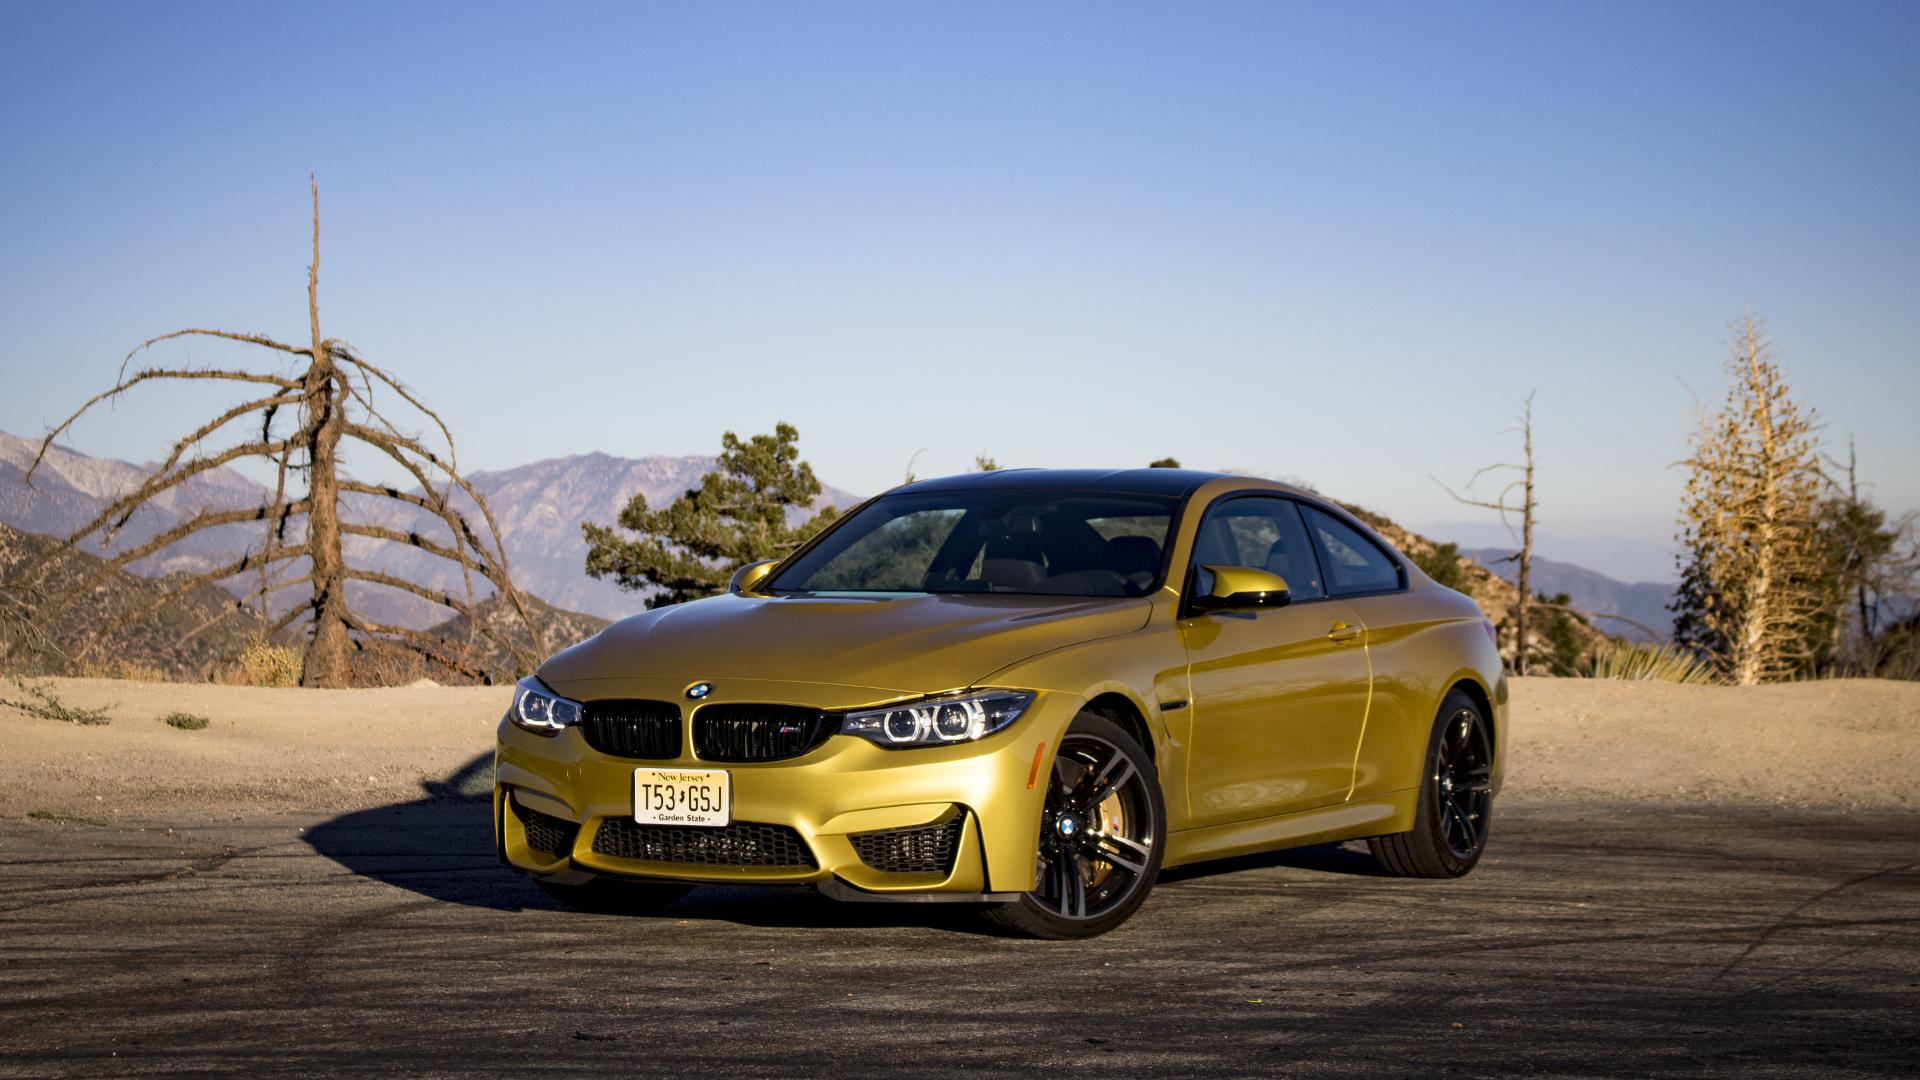 2018 BMW M4 Test Drive Review: The Gold Standard Holds Its Luster...For Now